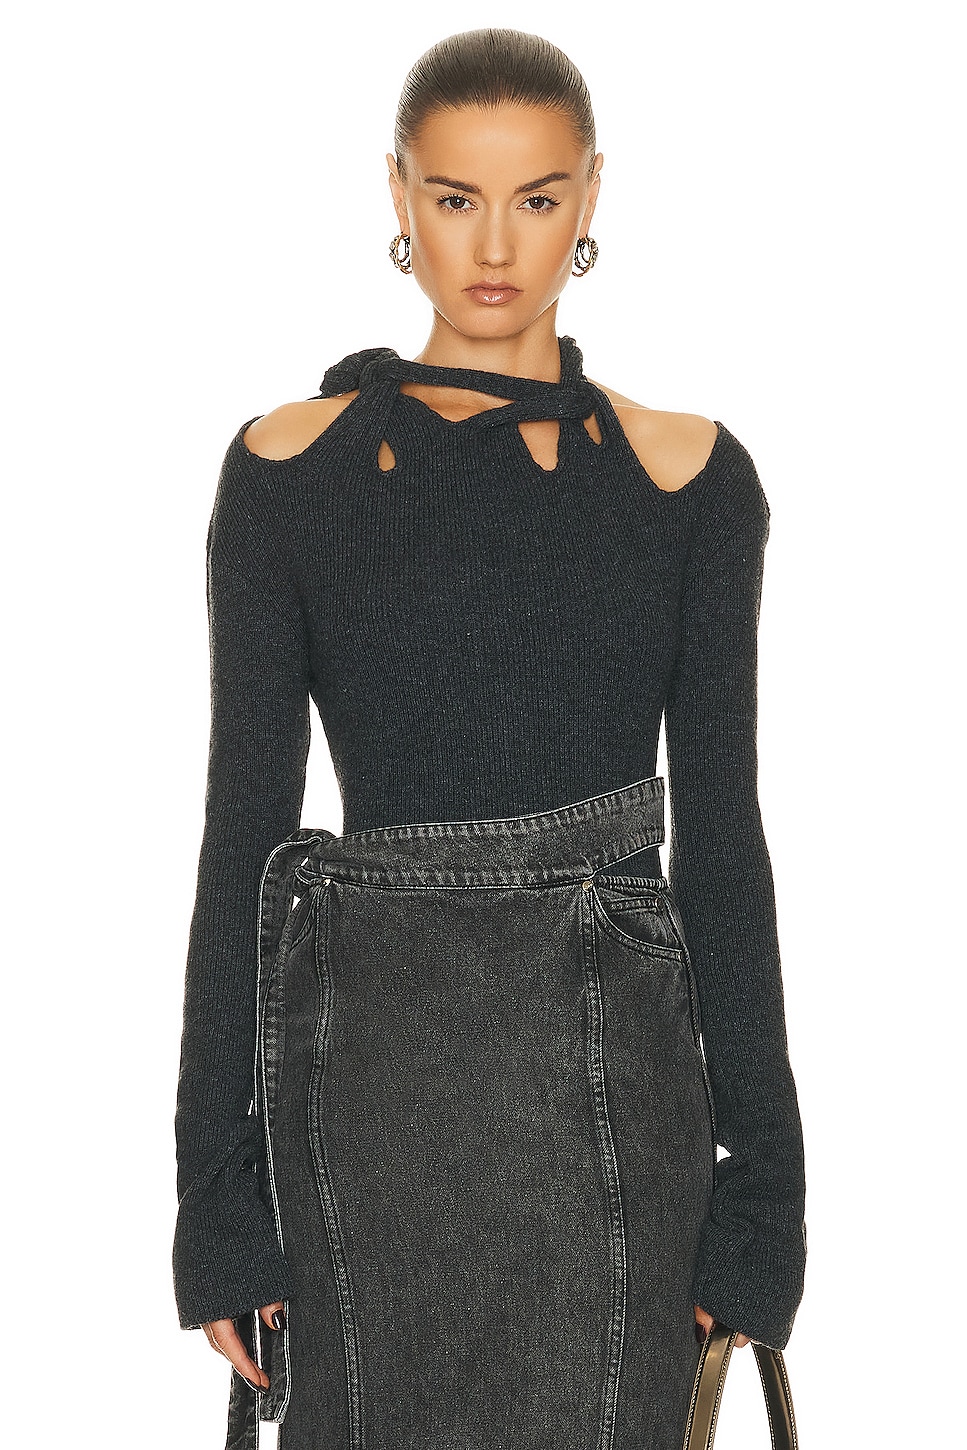 Braided Long Sleeve Top in Charcoal